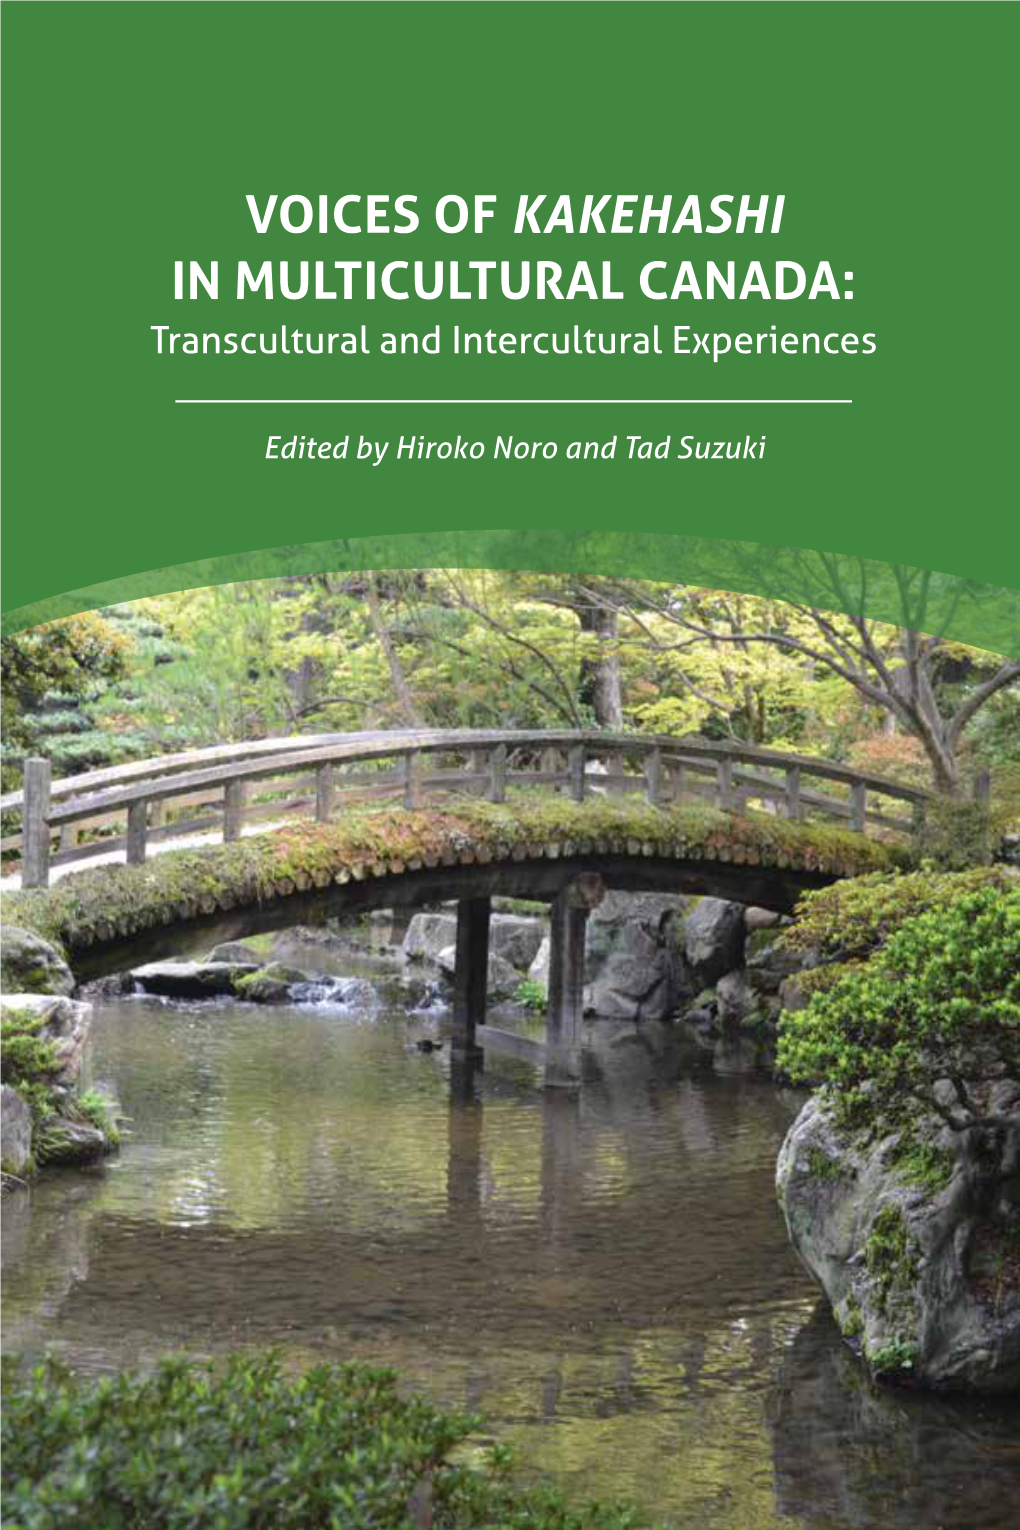 VOICES of KAKEHASHI in MULTICULTURAL CANADA: Transcultural and Intercultural Experiences